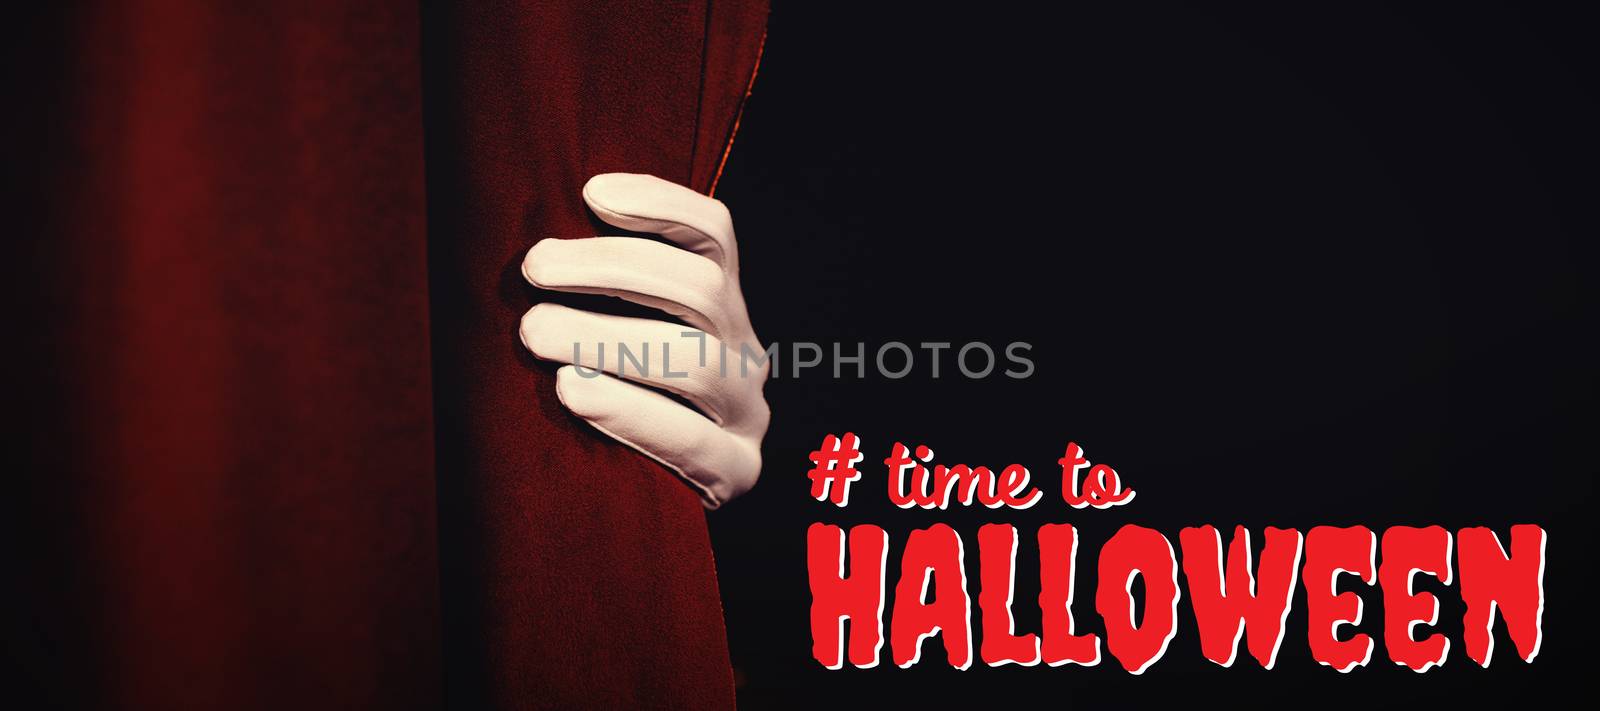 Digital composite image of time to Halloween text against cropped hand in glove holding curtain